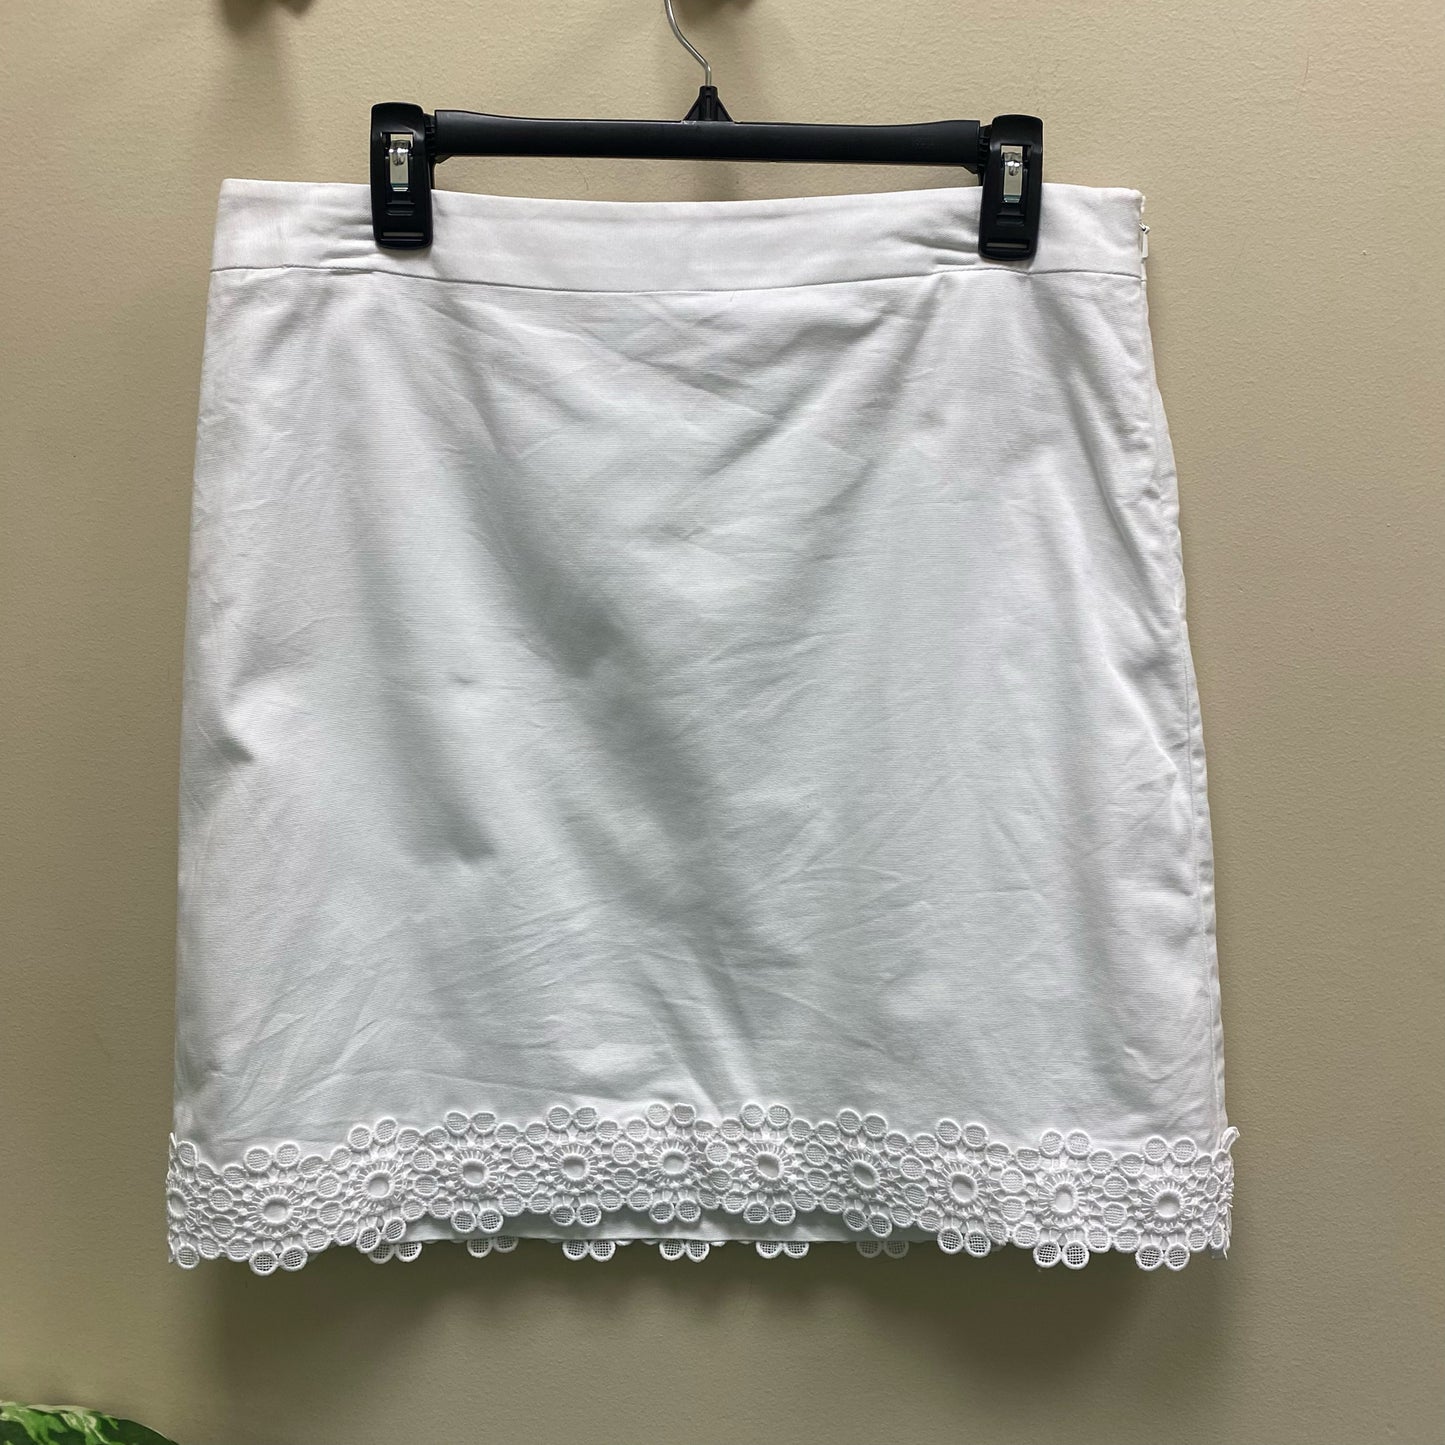 Talbots Embroidered Crochet Trim Pencil Skirt - Size 10